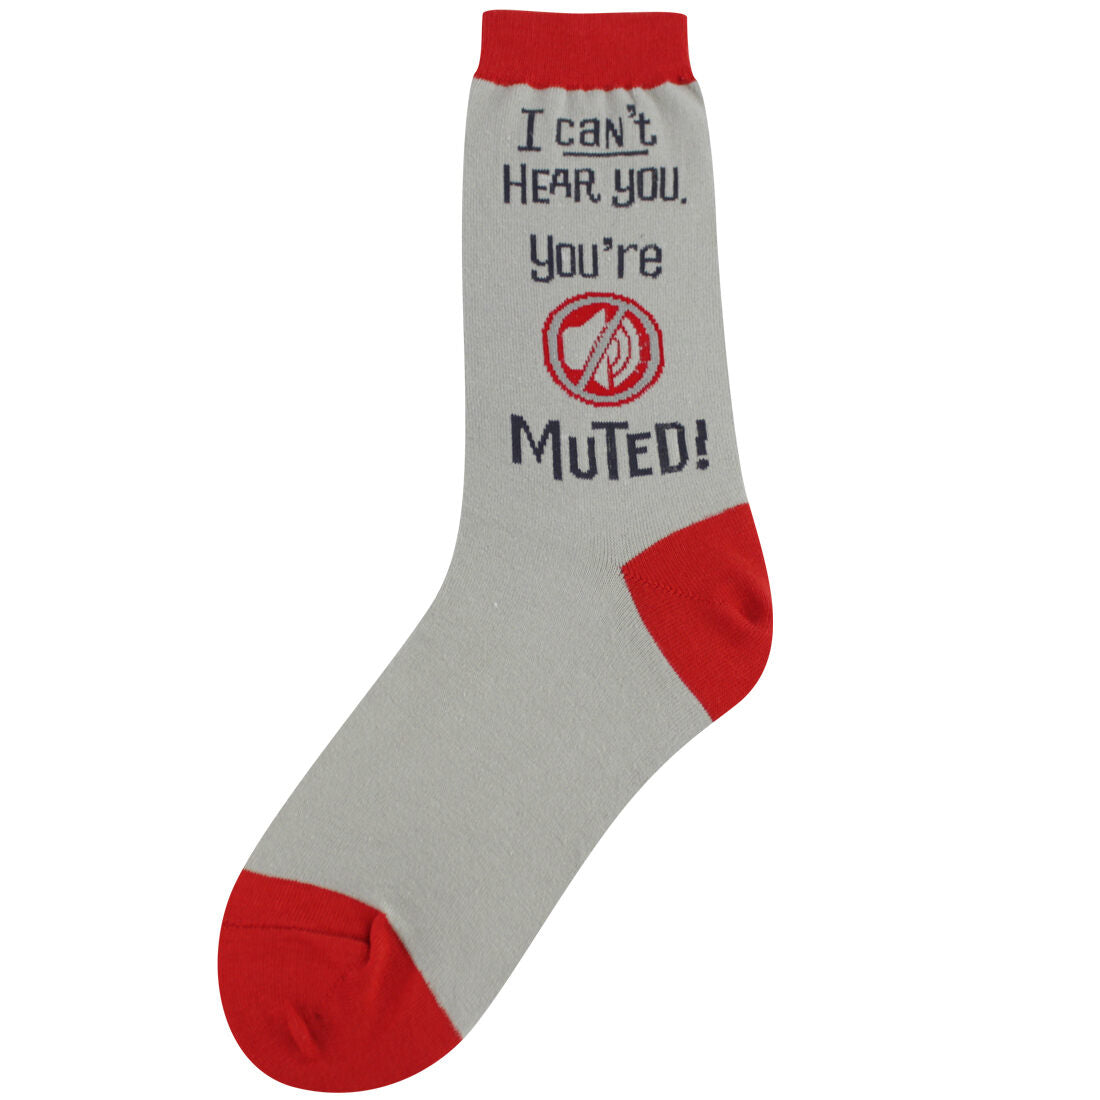 You are Muted Crew Socks | Women's - Knock Your Socks Off